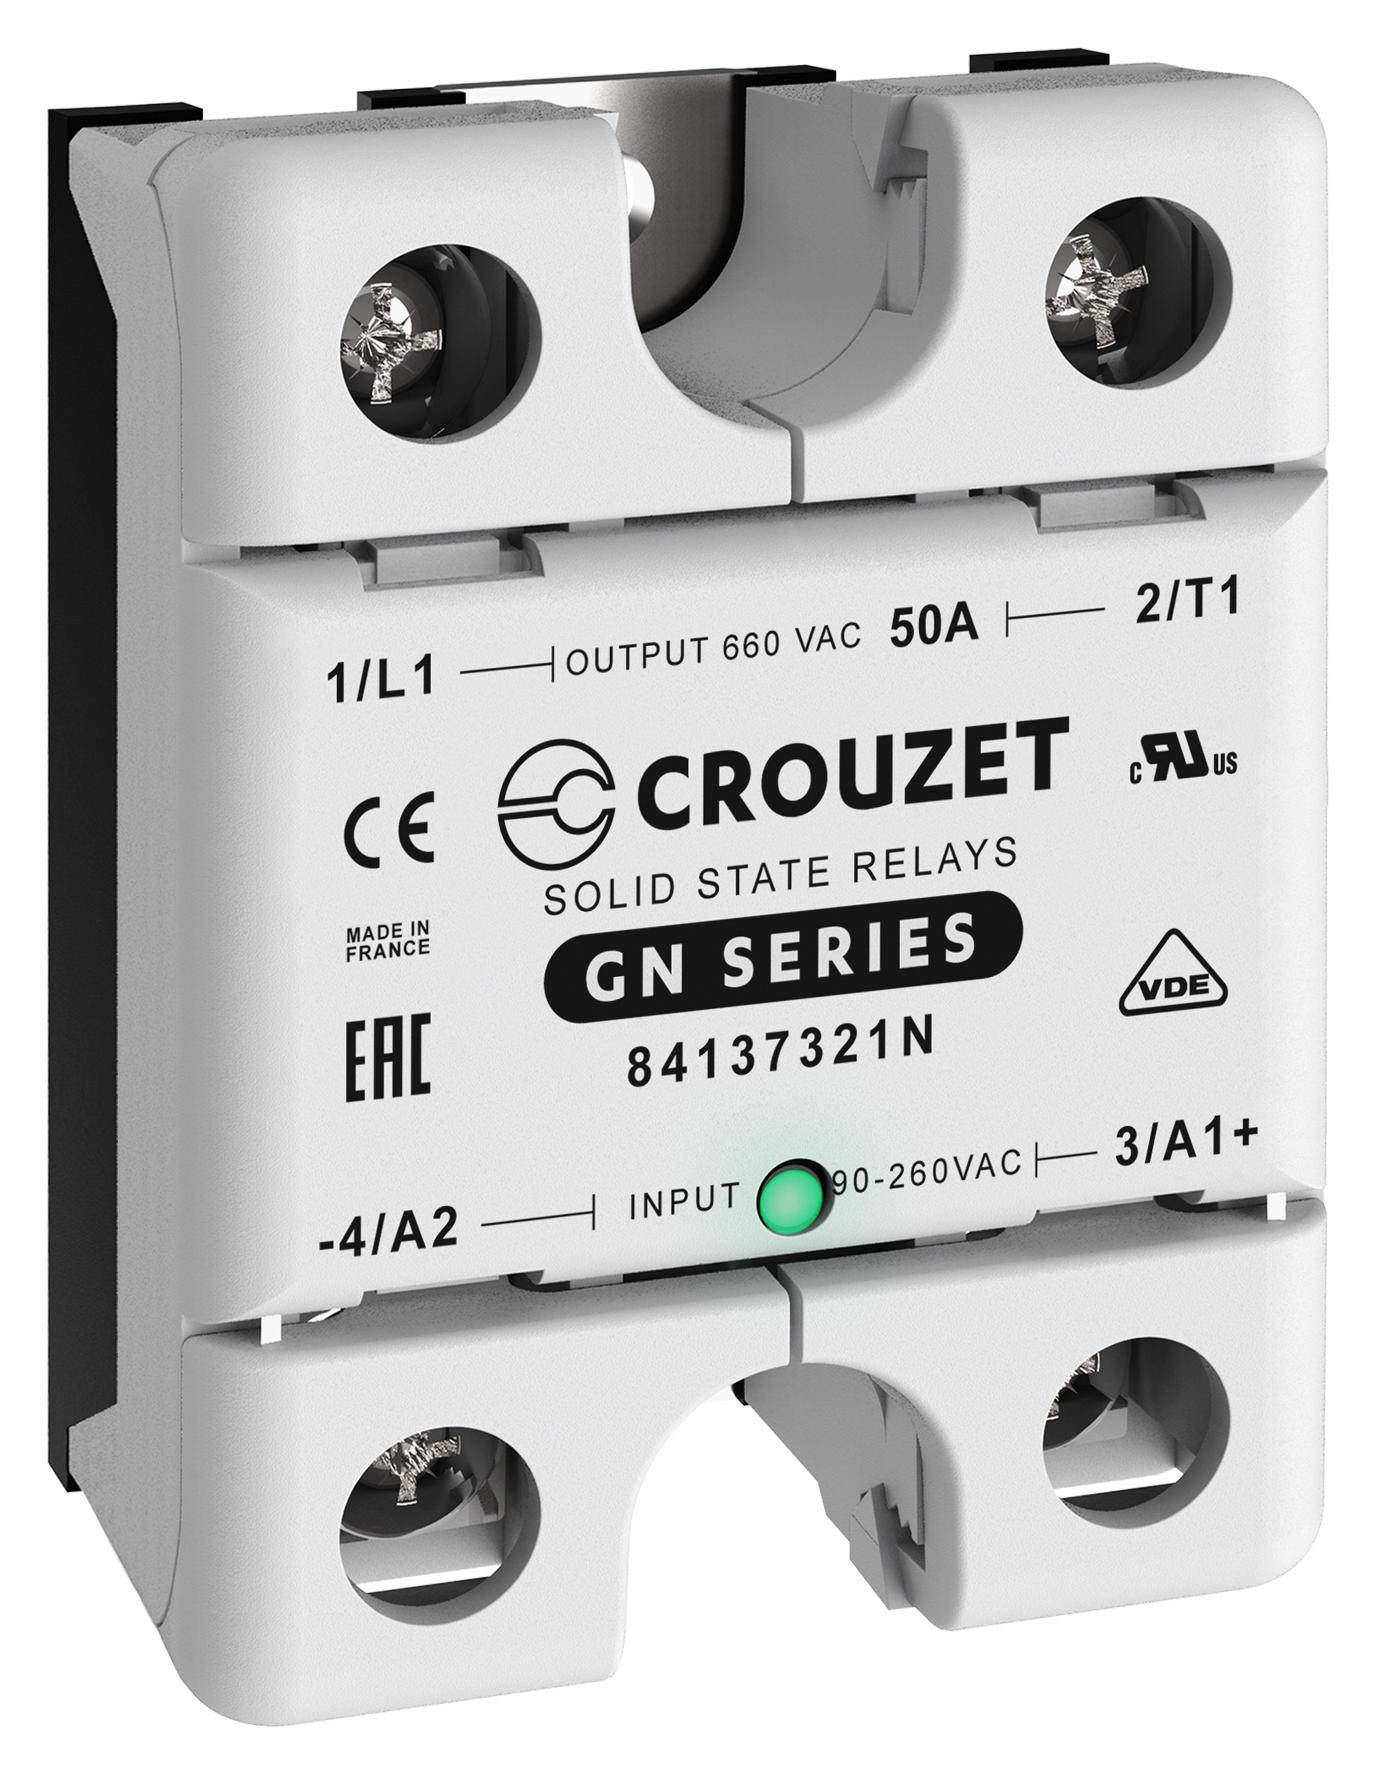 84137321N SOLID STATE RELAY, 50A, 48-660VAC, PANEL CROUZET